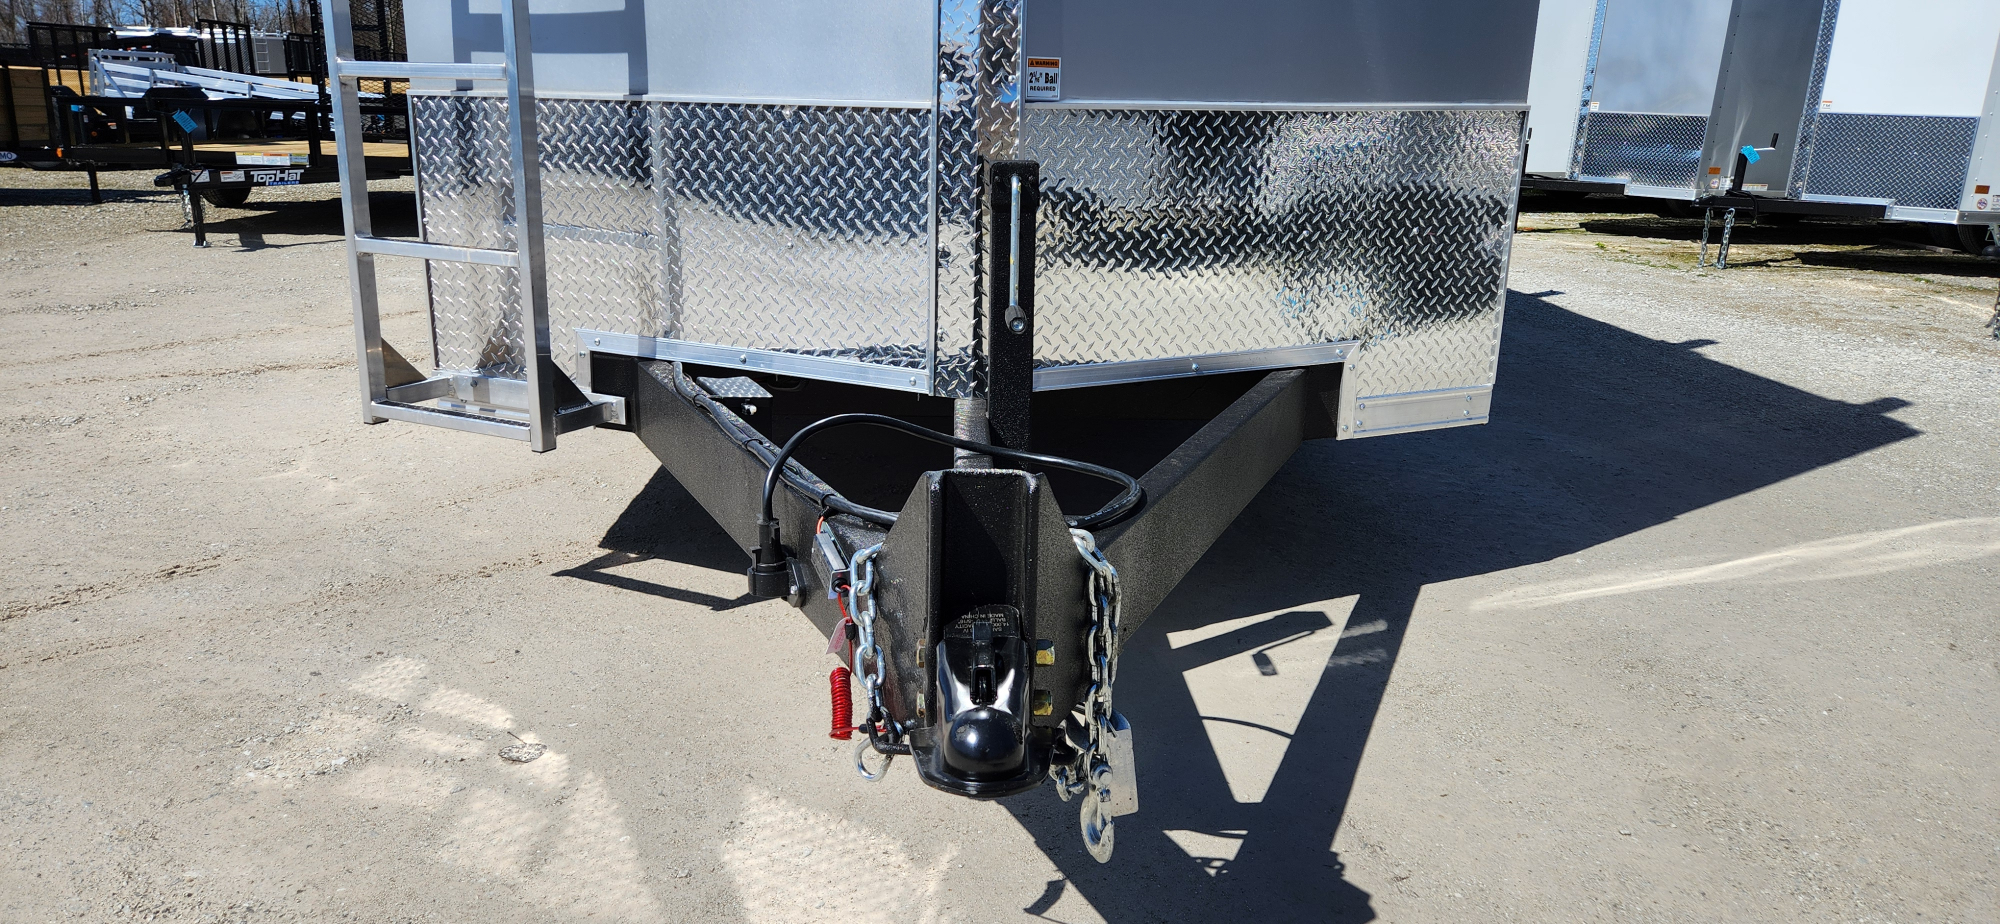 DarkHorse 7X14 Wedge Nose Tandem Axle Steel Contractor Cargo Trailer with Double Rear Doors, 12" Extra Height - 2500 Series - Silver